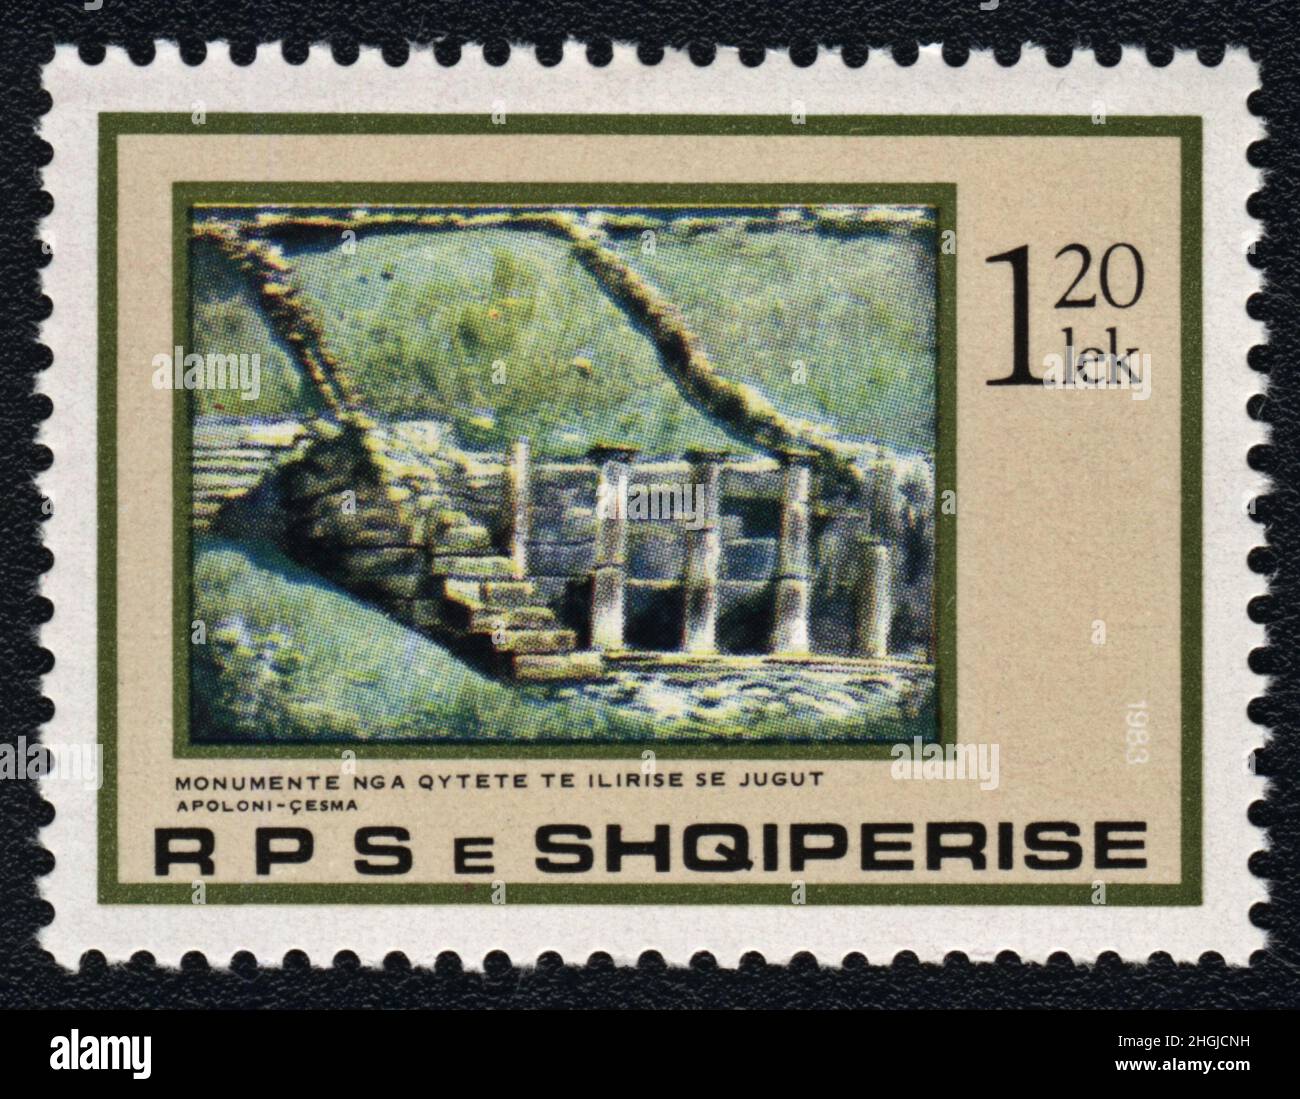 Postage stamps Shqiperise. Ruins Of An Ancient Greek City Of Apollonia. History of Albania. Monuments from South Illyrian cities Stock Photo